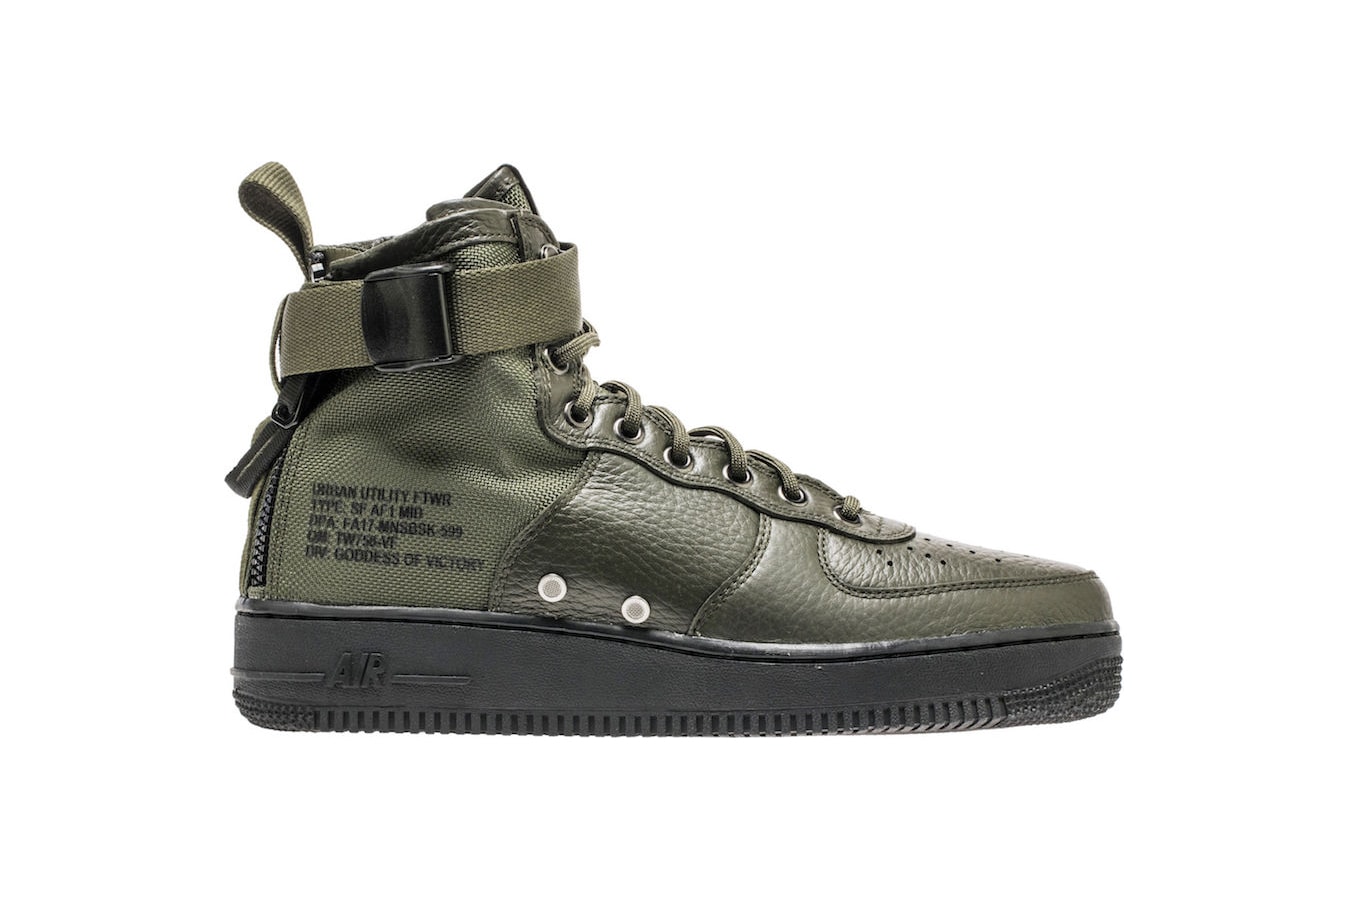 Nike Special Field Air Force 1 SF-AF1 Mid Sequoia Colorway Military Green Olive